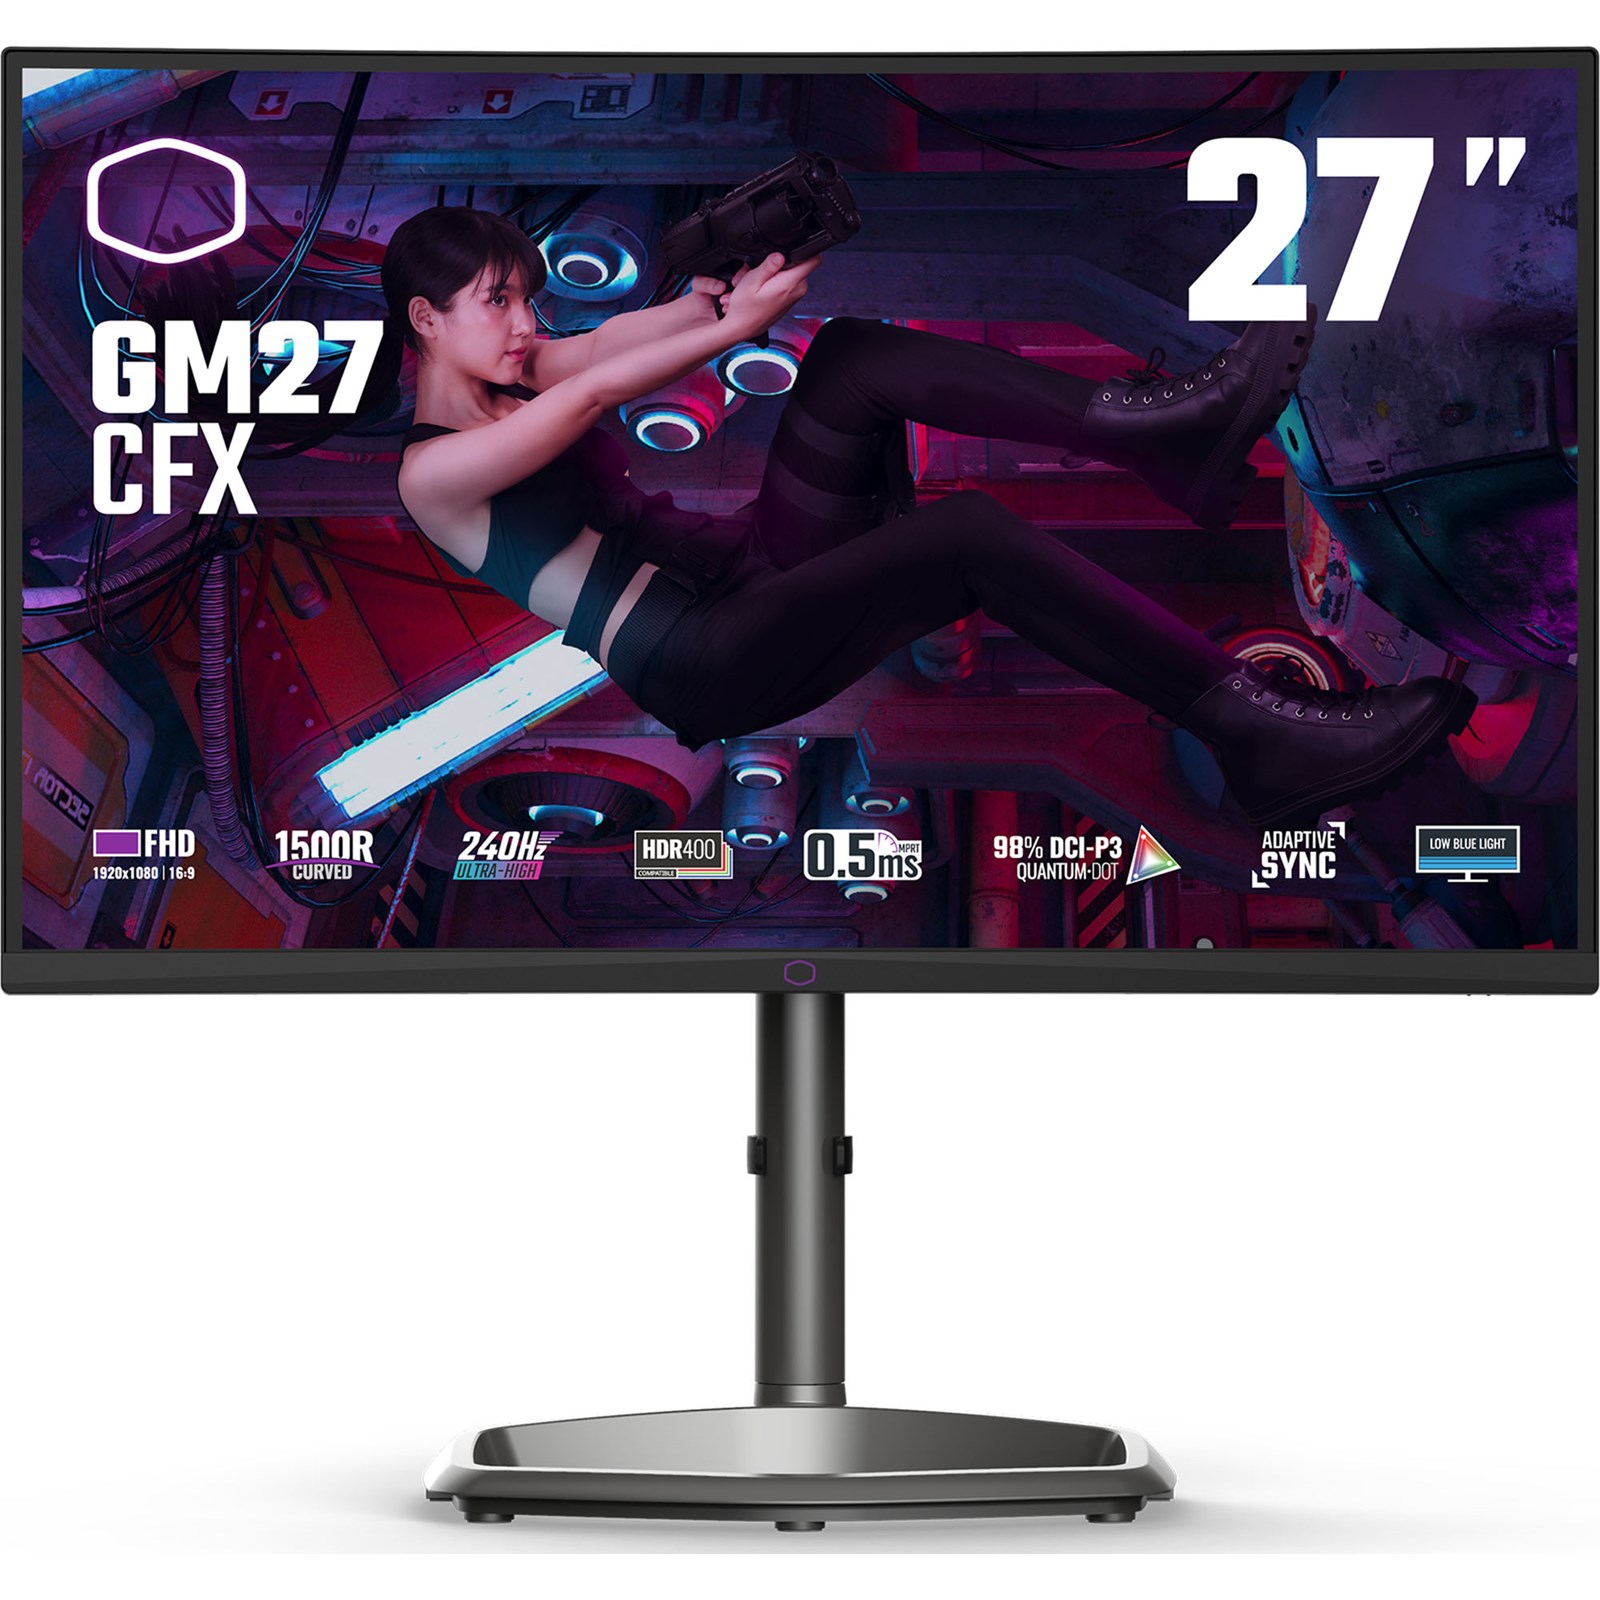 Cooler Master GM27-CFX 27 inch Gaming Curved Monitor - Full HD, 0.5ms, Speakers